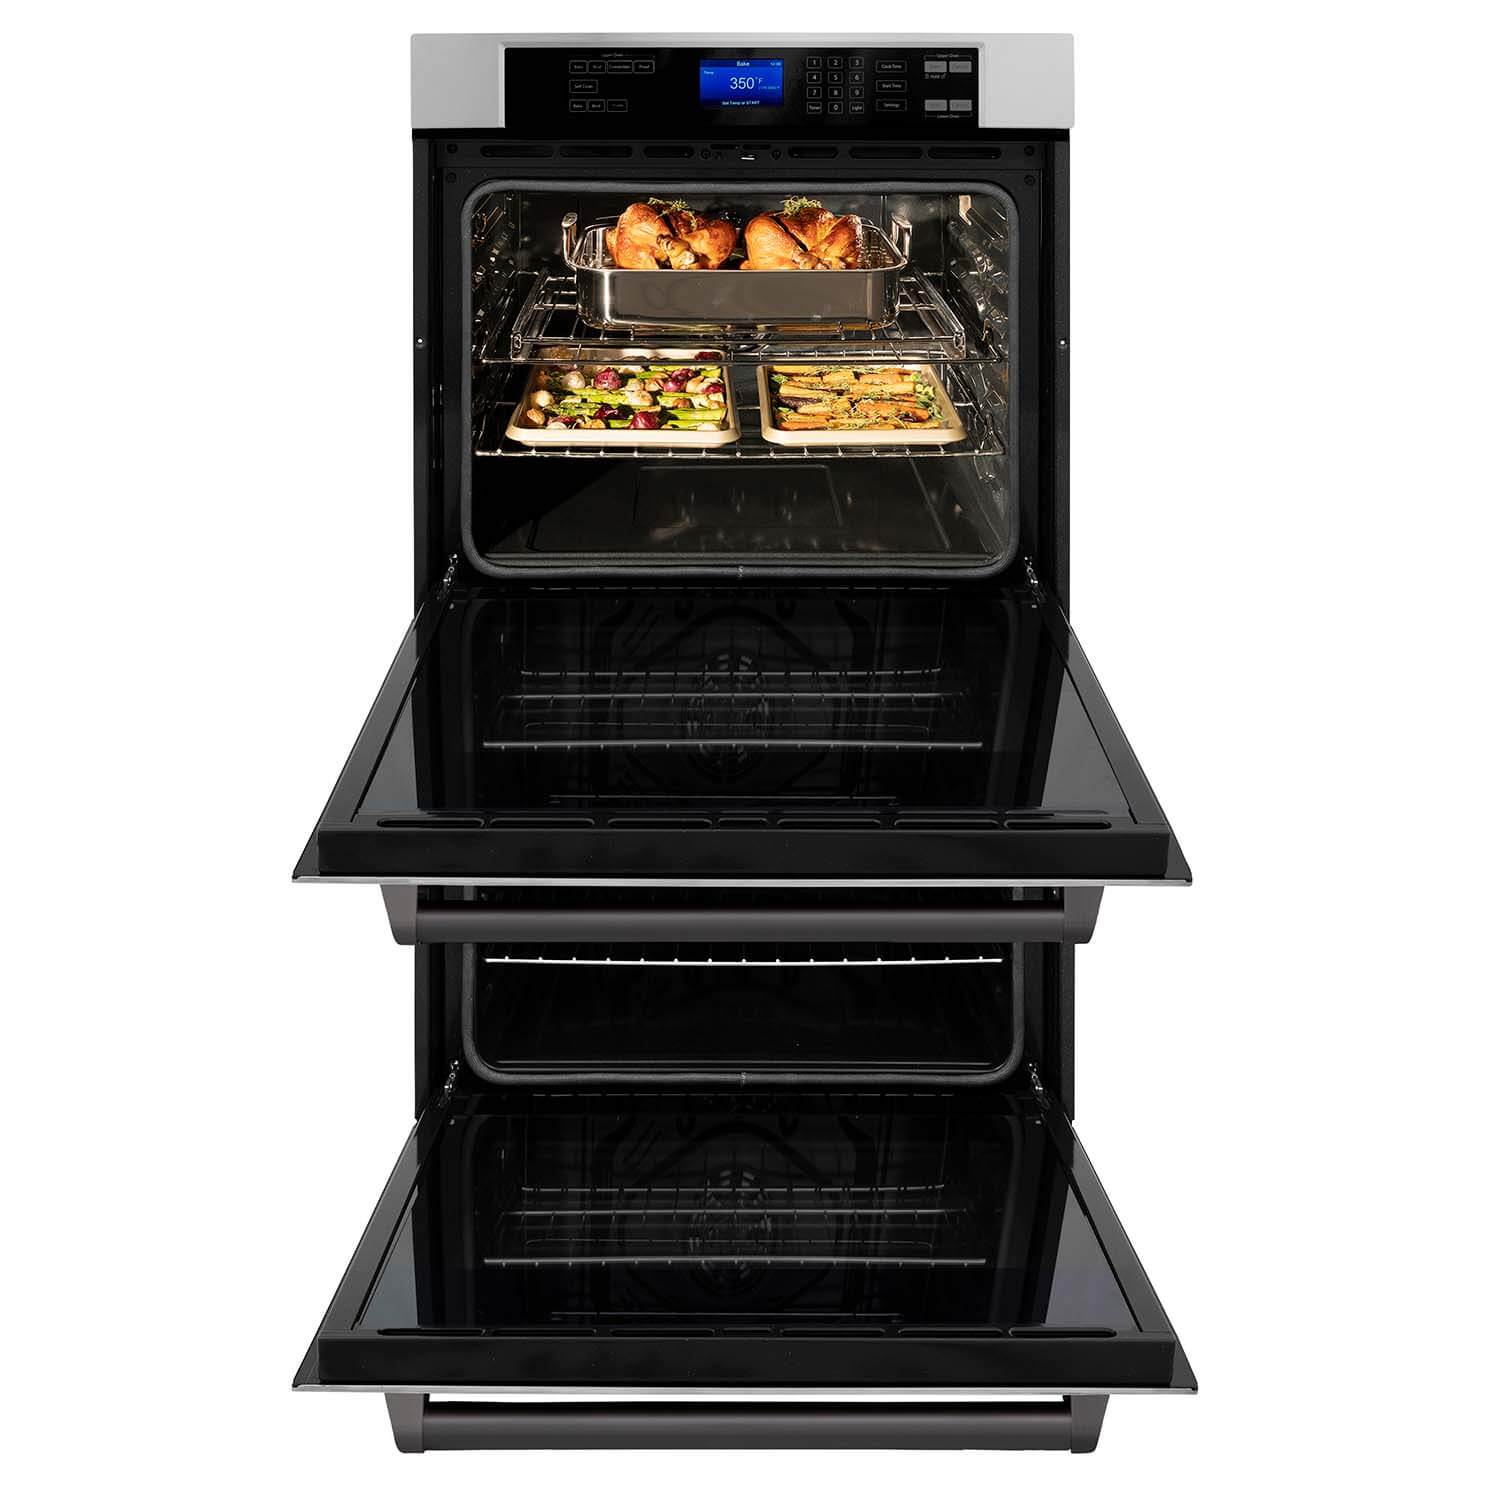 ZLINE double wall oven with doors open and food inside top oven.